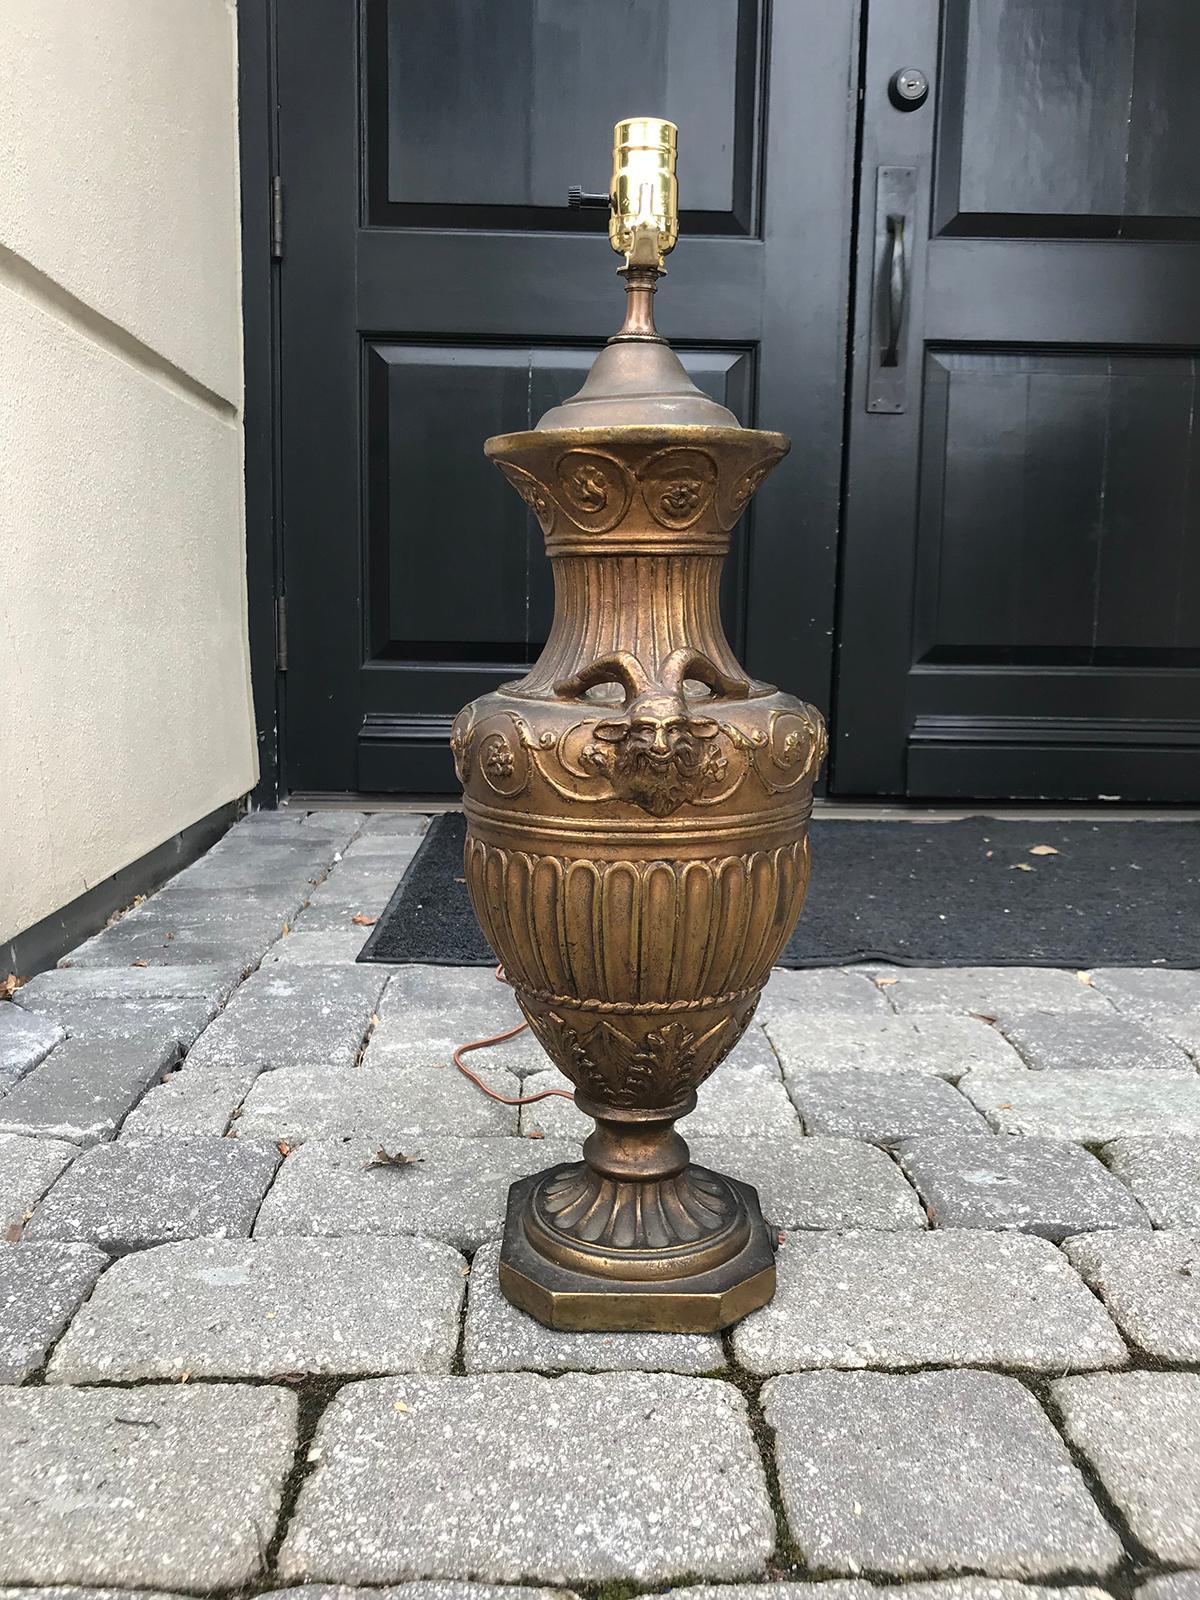 Repoussé Early 20th Century Neoclassical Gilt Repousee Urn Lamp For Sale